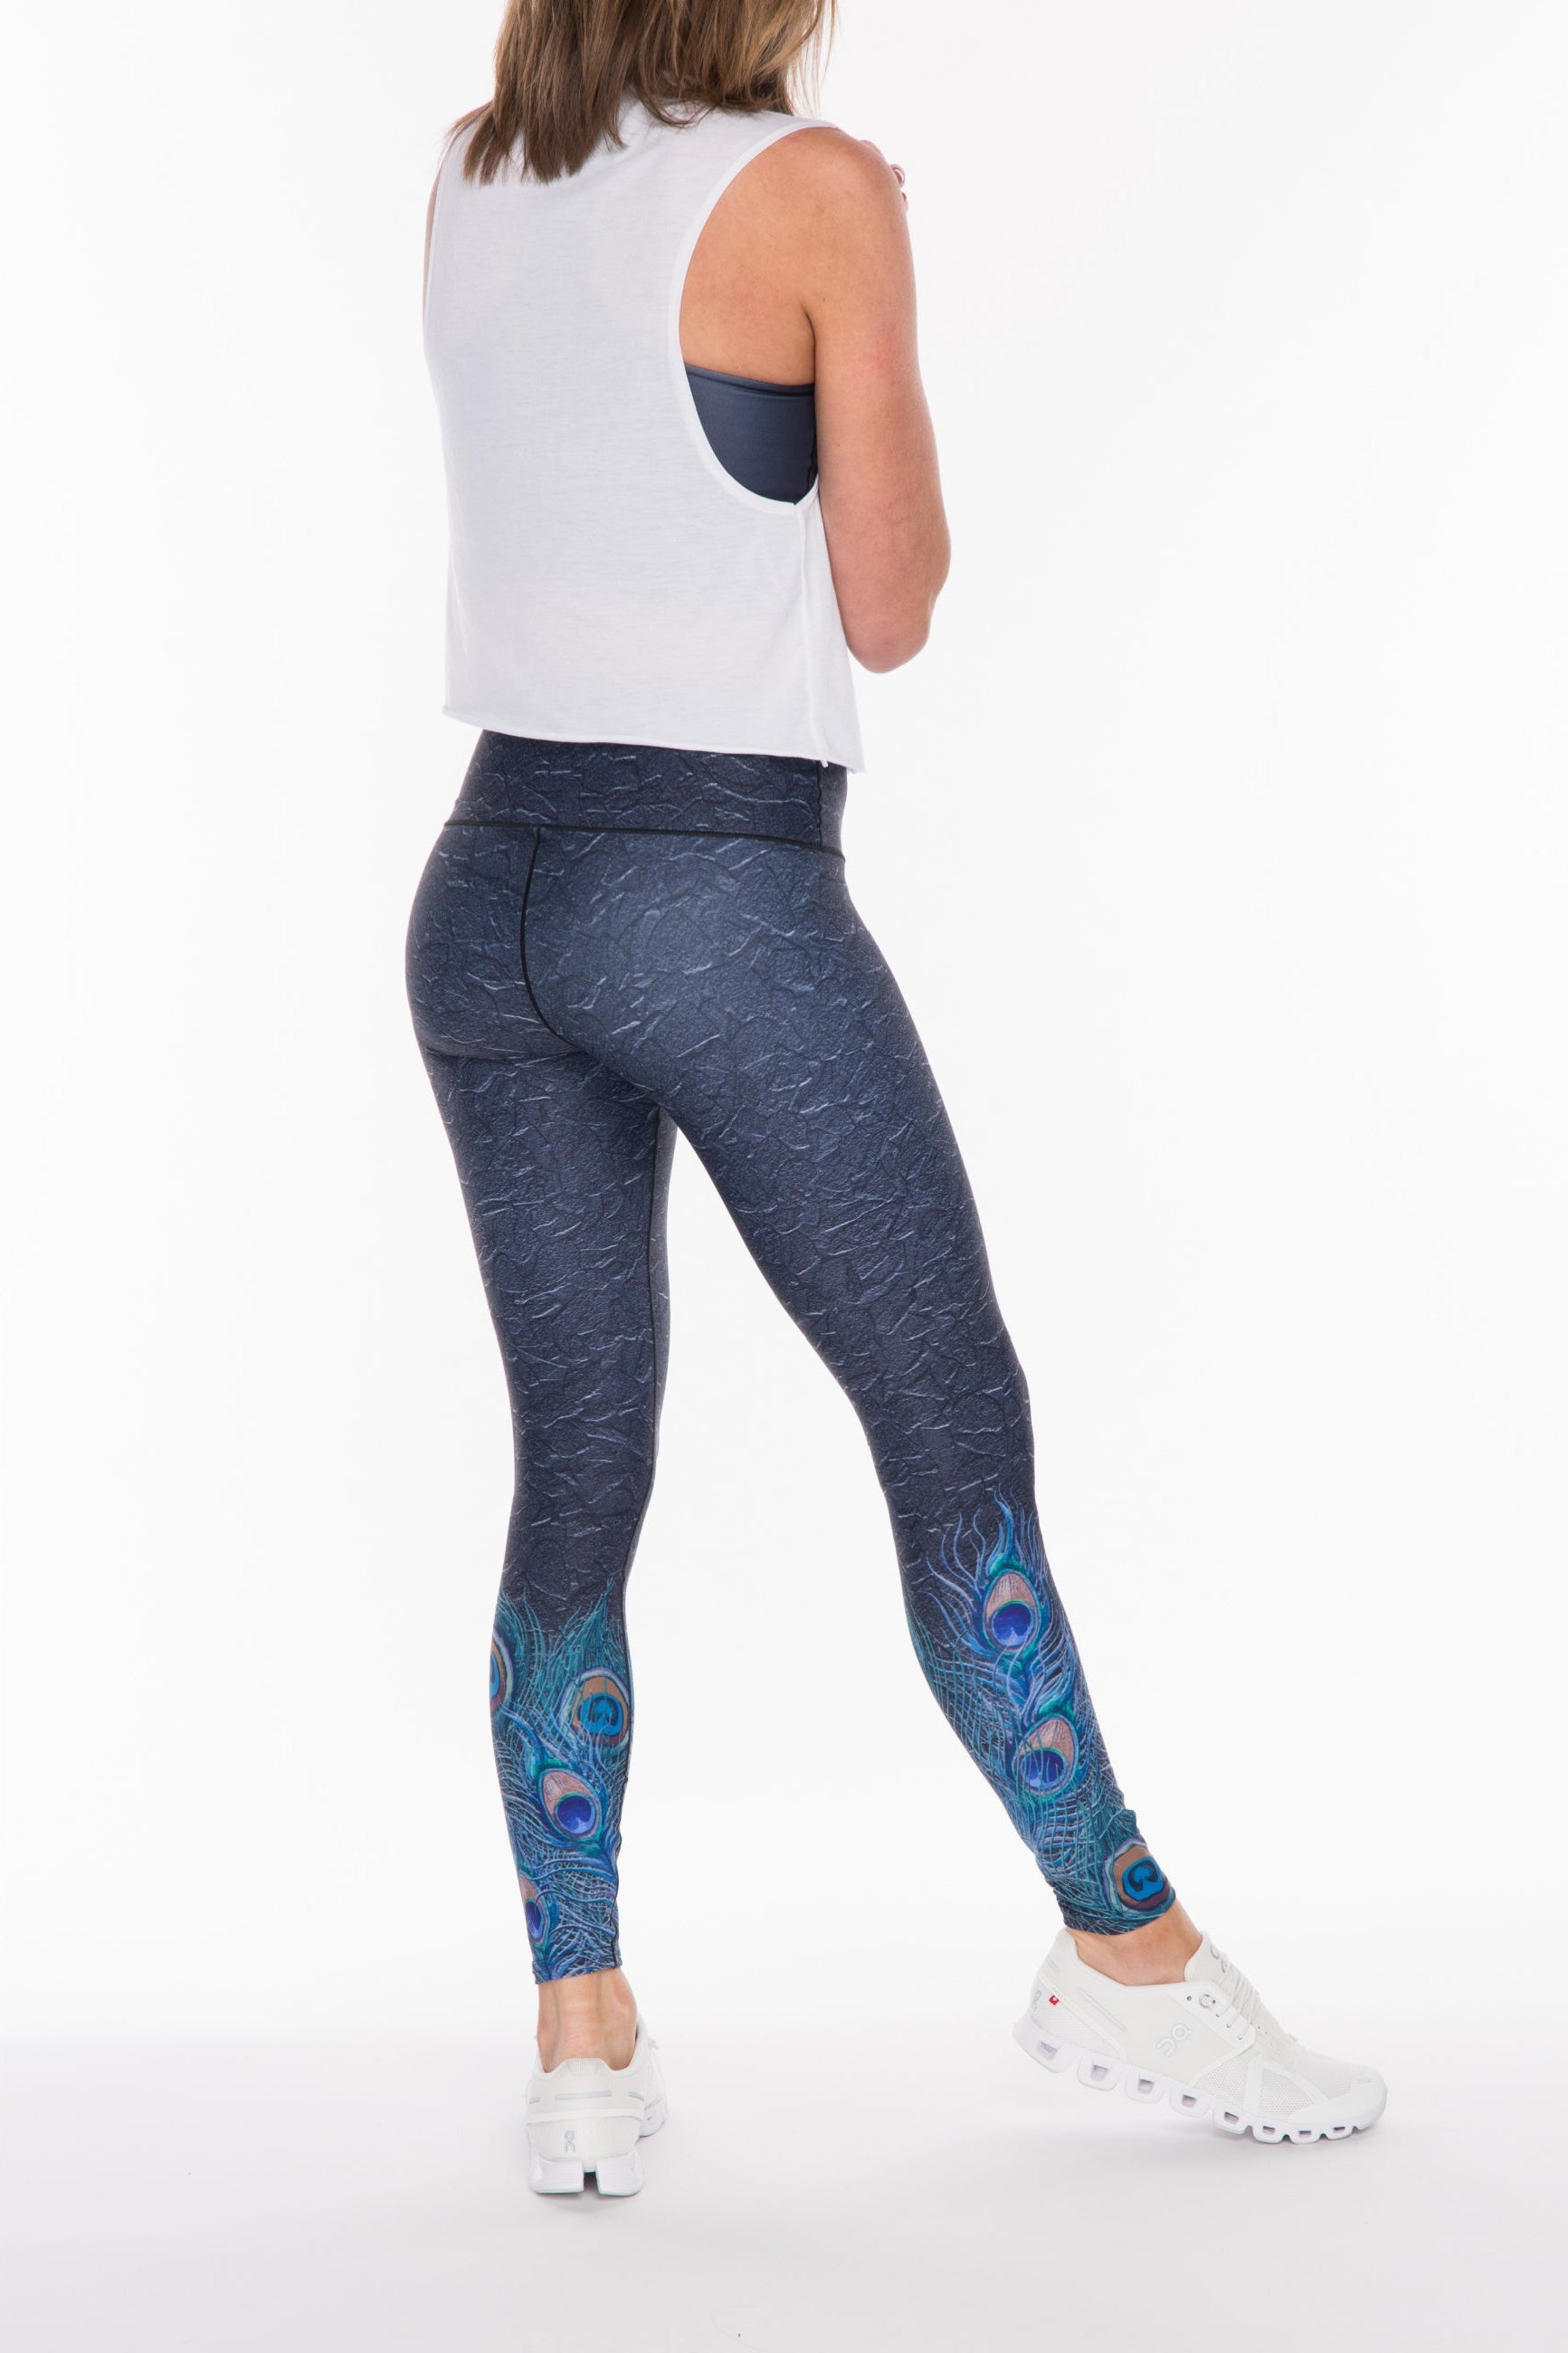 Yoga Pants Light as a Feather Colorado Threads Clothing